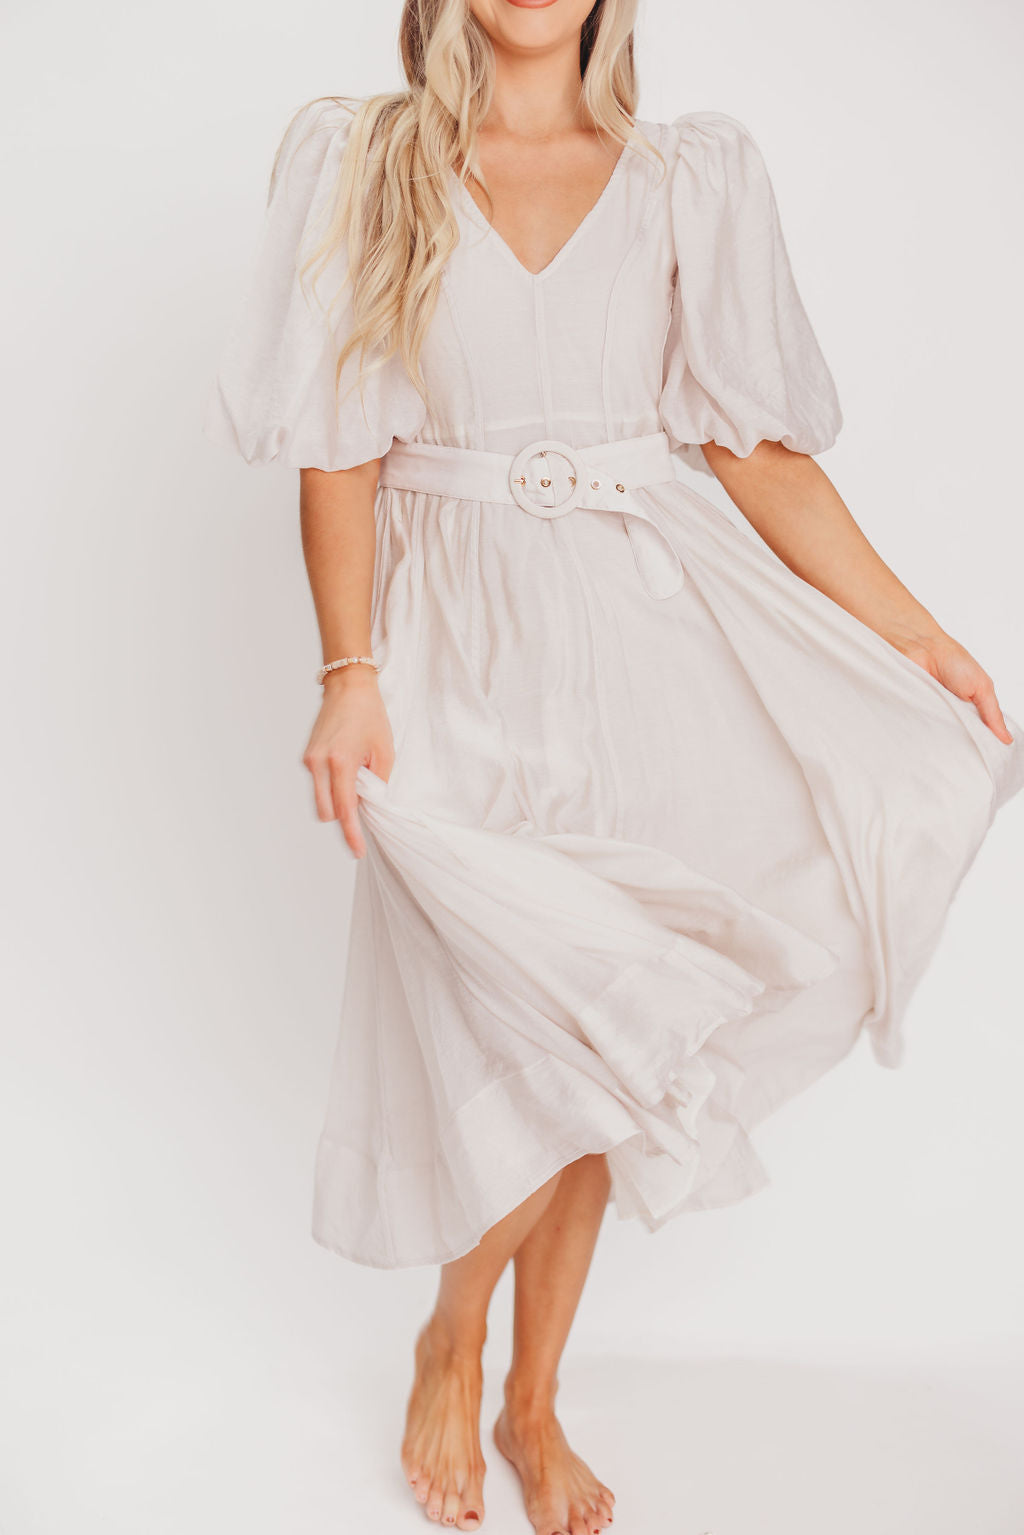 Courtney Puffed Sleeve Midi Dress with Belt in Natural